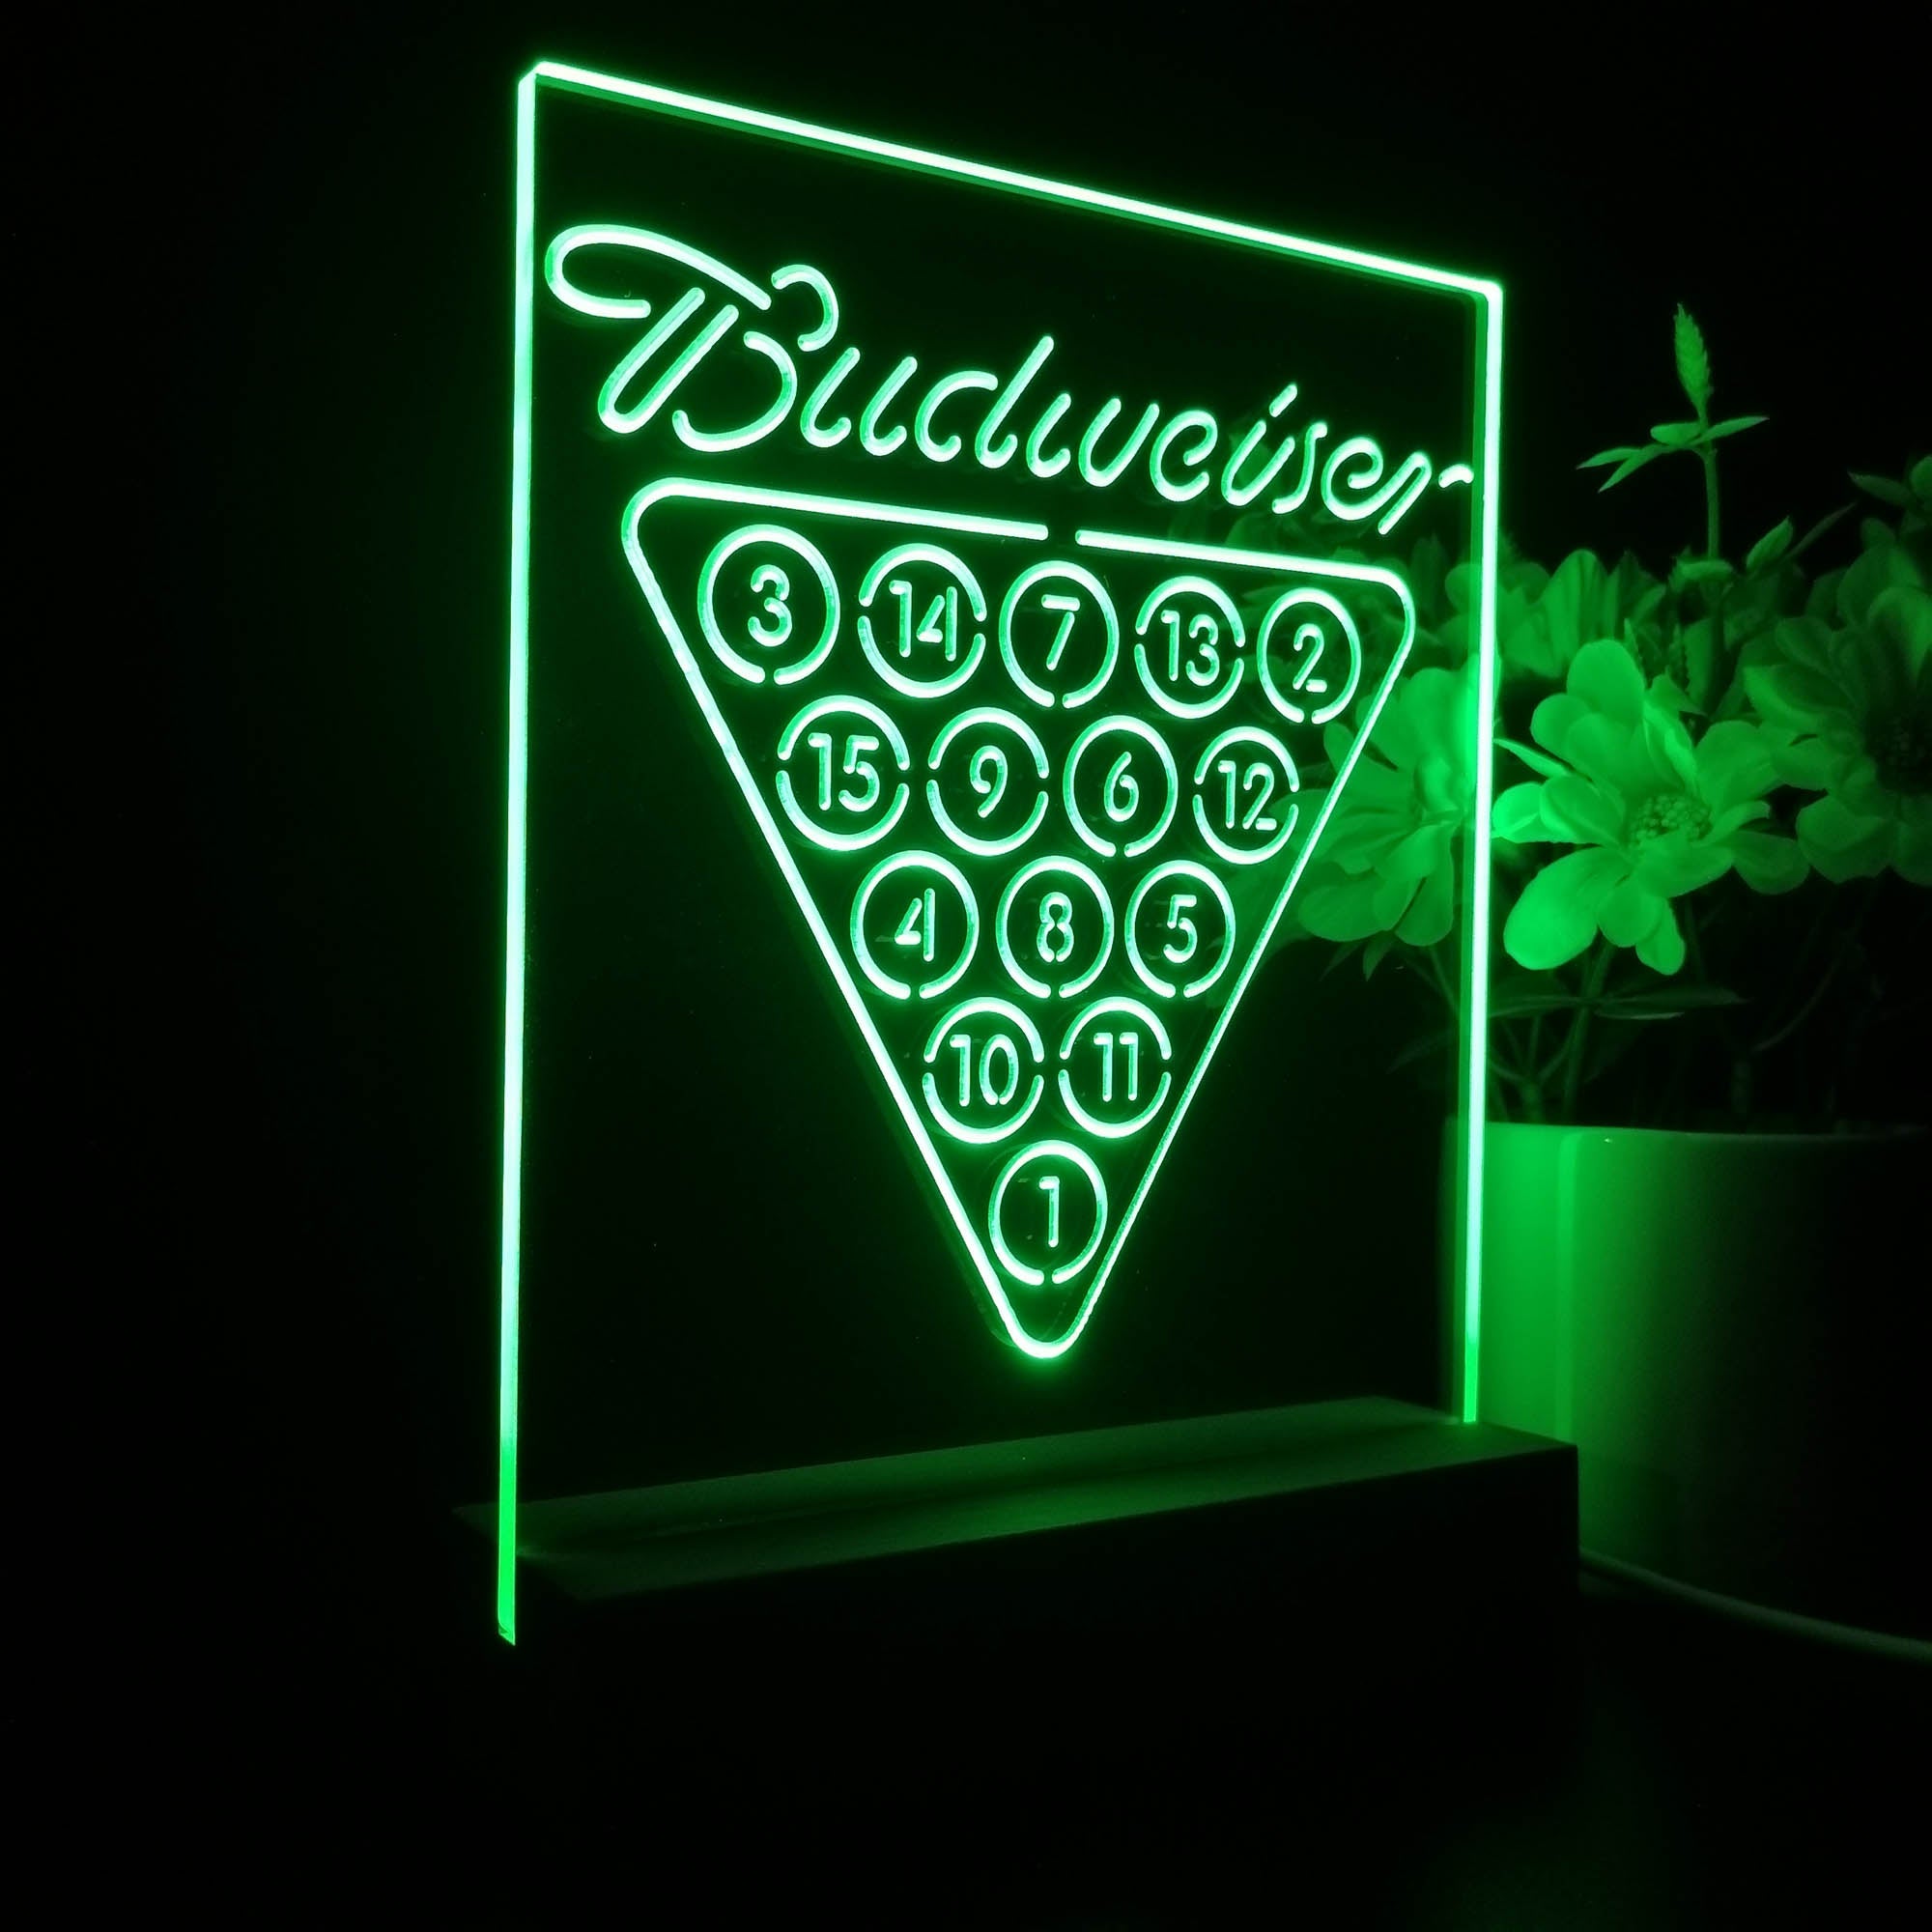 Budweisers Pool Room Home Beer Bar Led Neon Light Decoration Gifts Night Light LED Sign